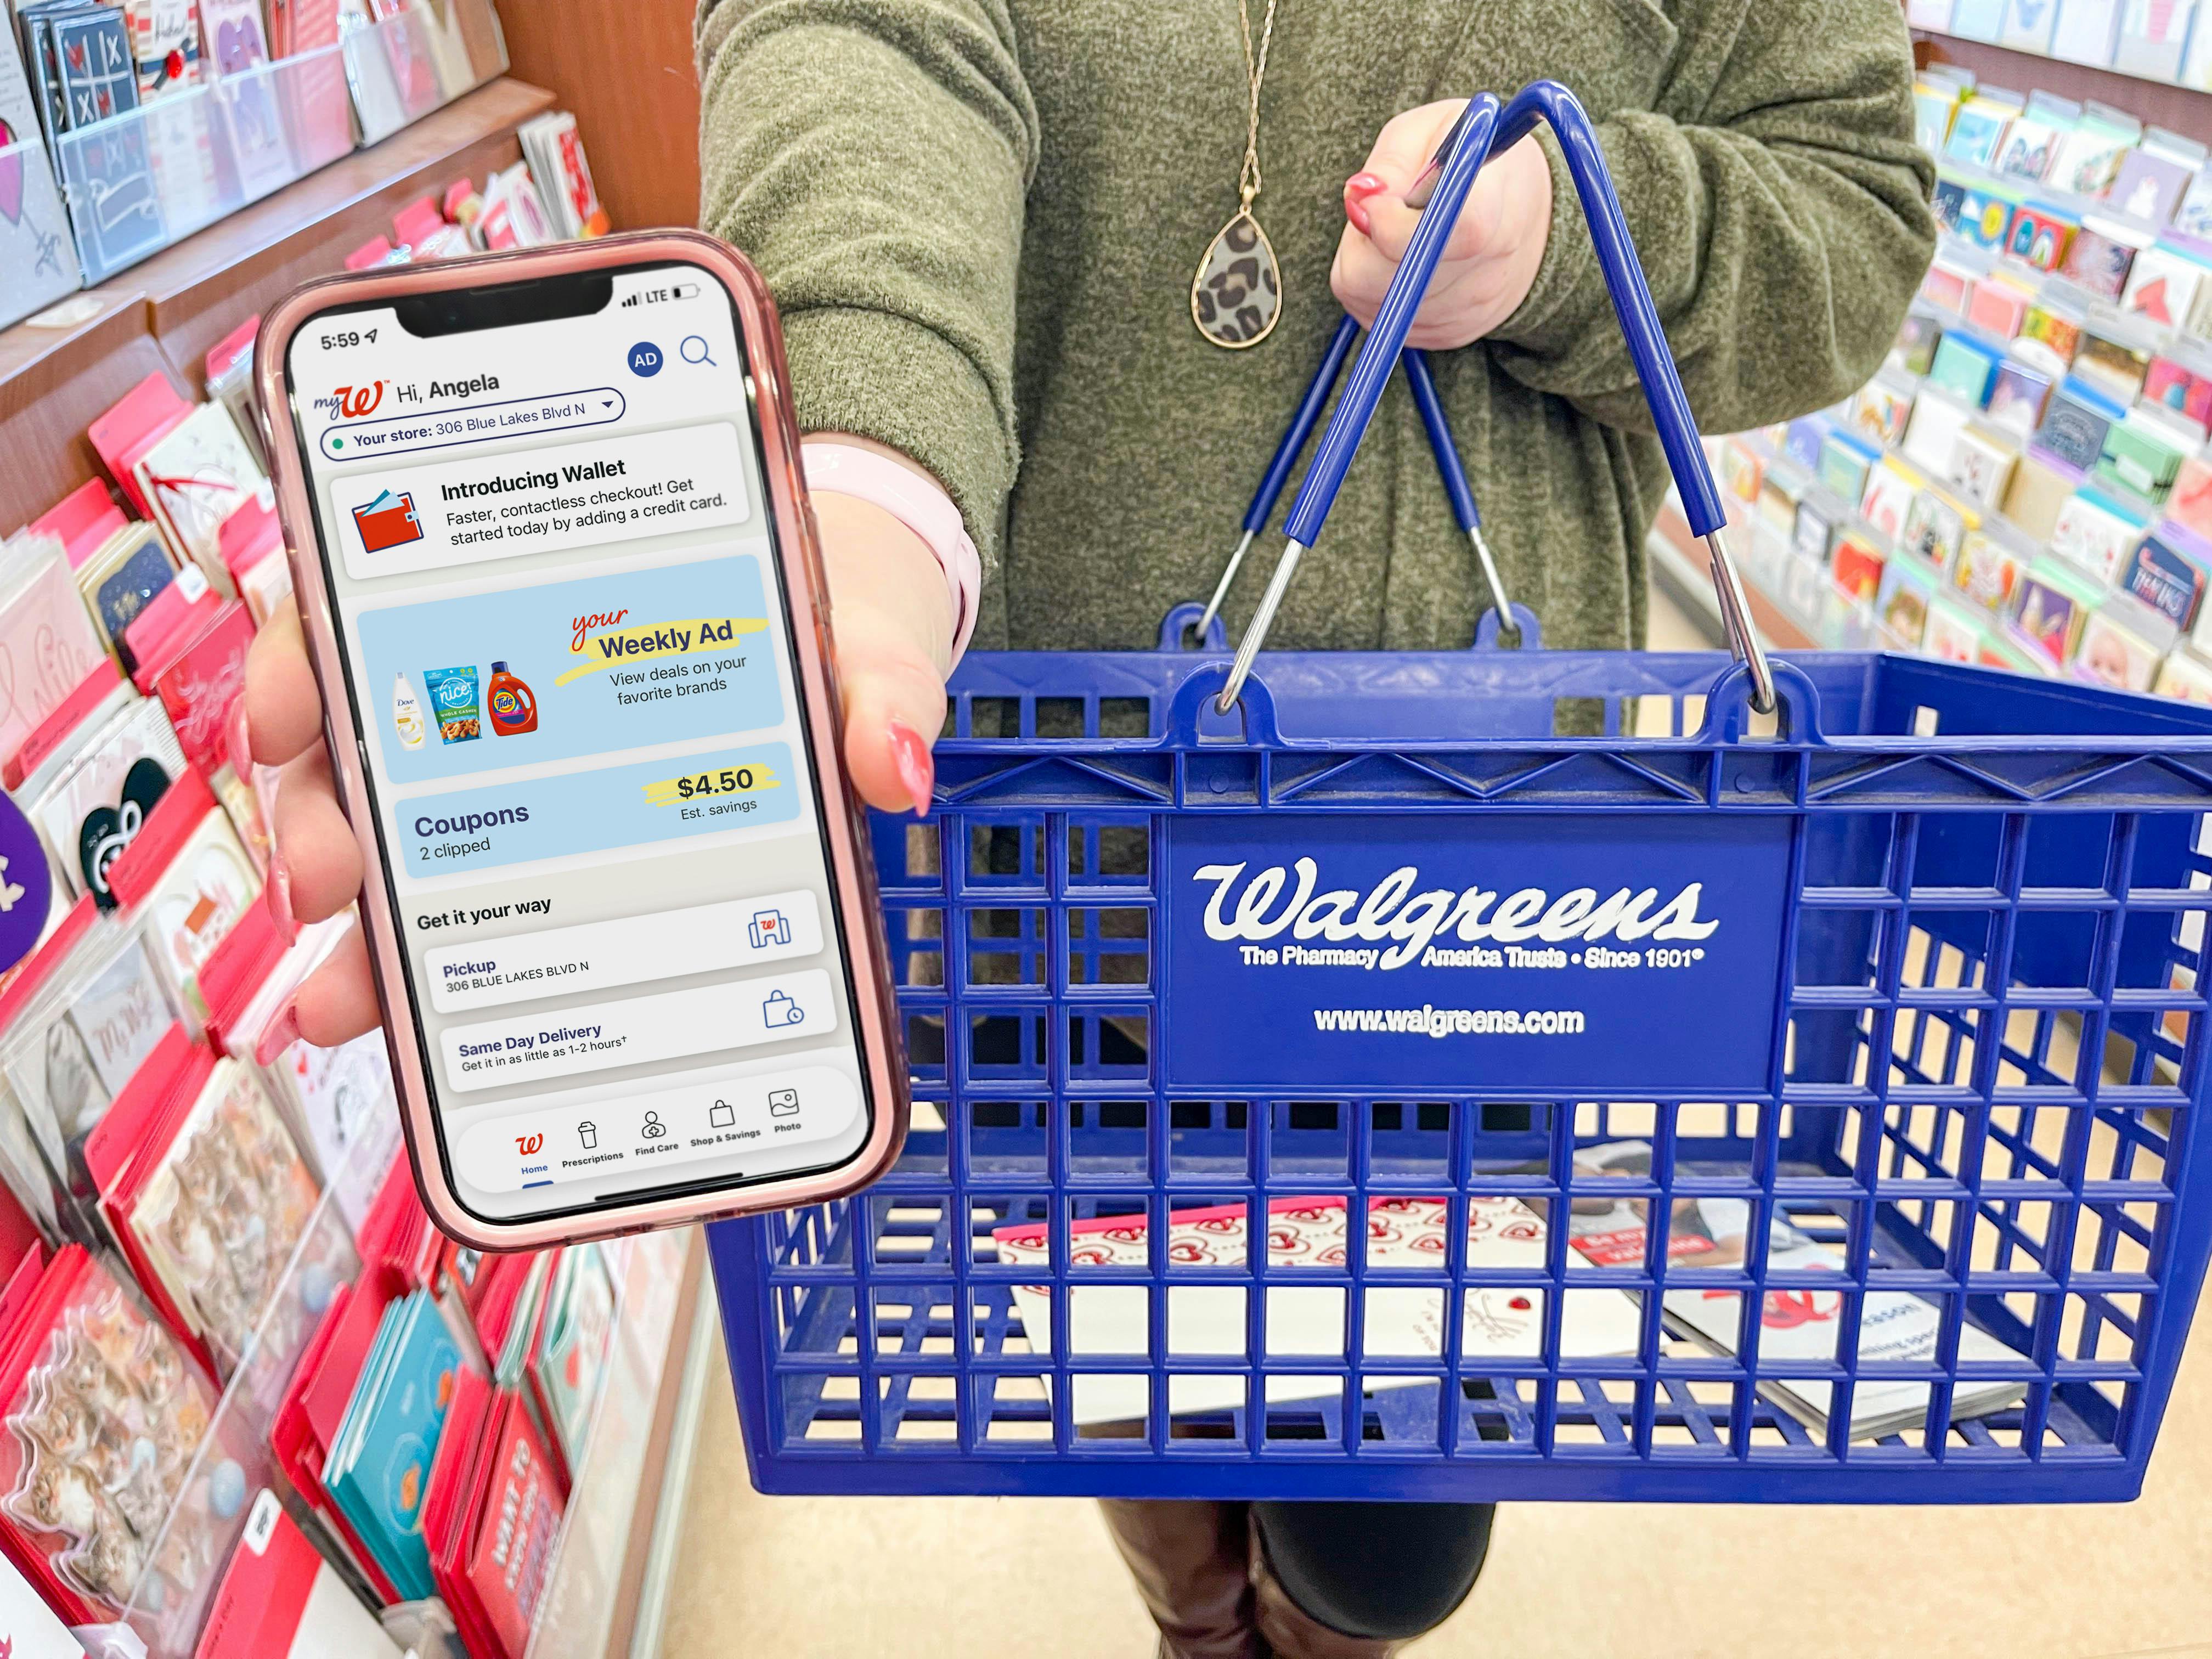 woman holding cellphone with walgreens app while holding walgreens basket